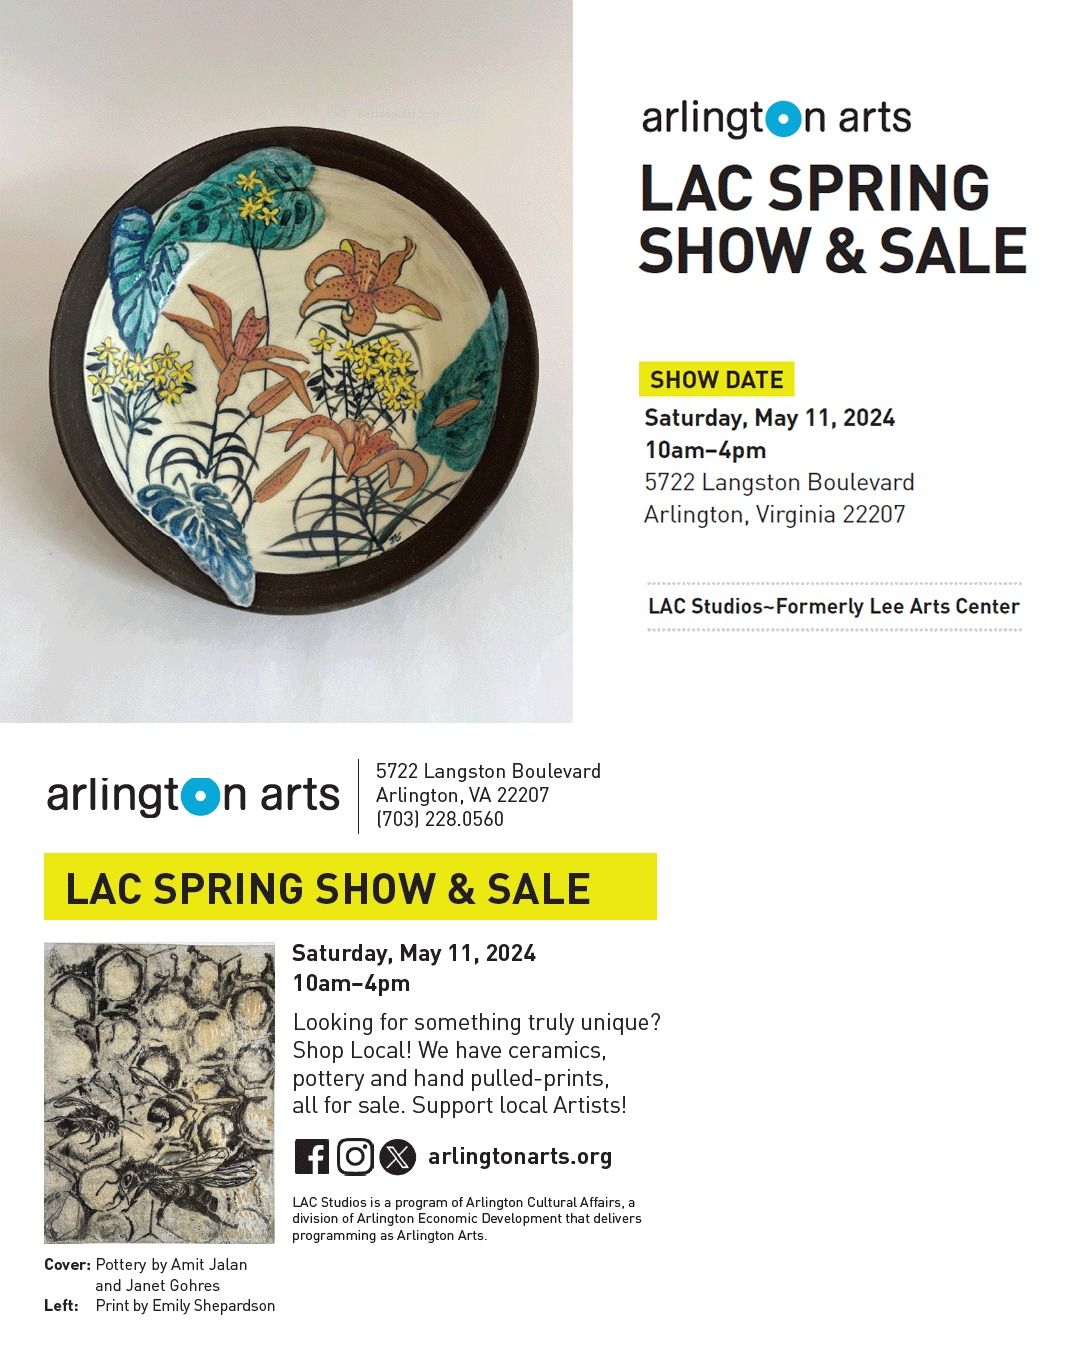 LAC Studios' (formerly Lee Art Center) Spring Show & Sale